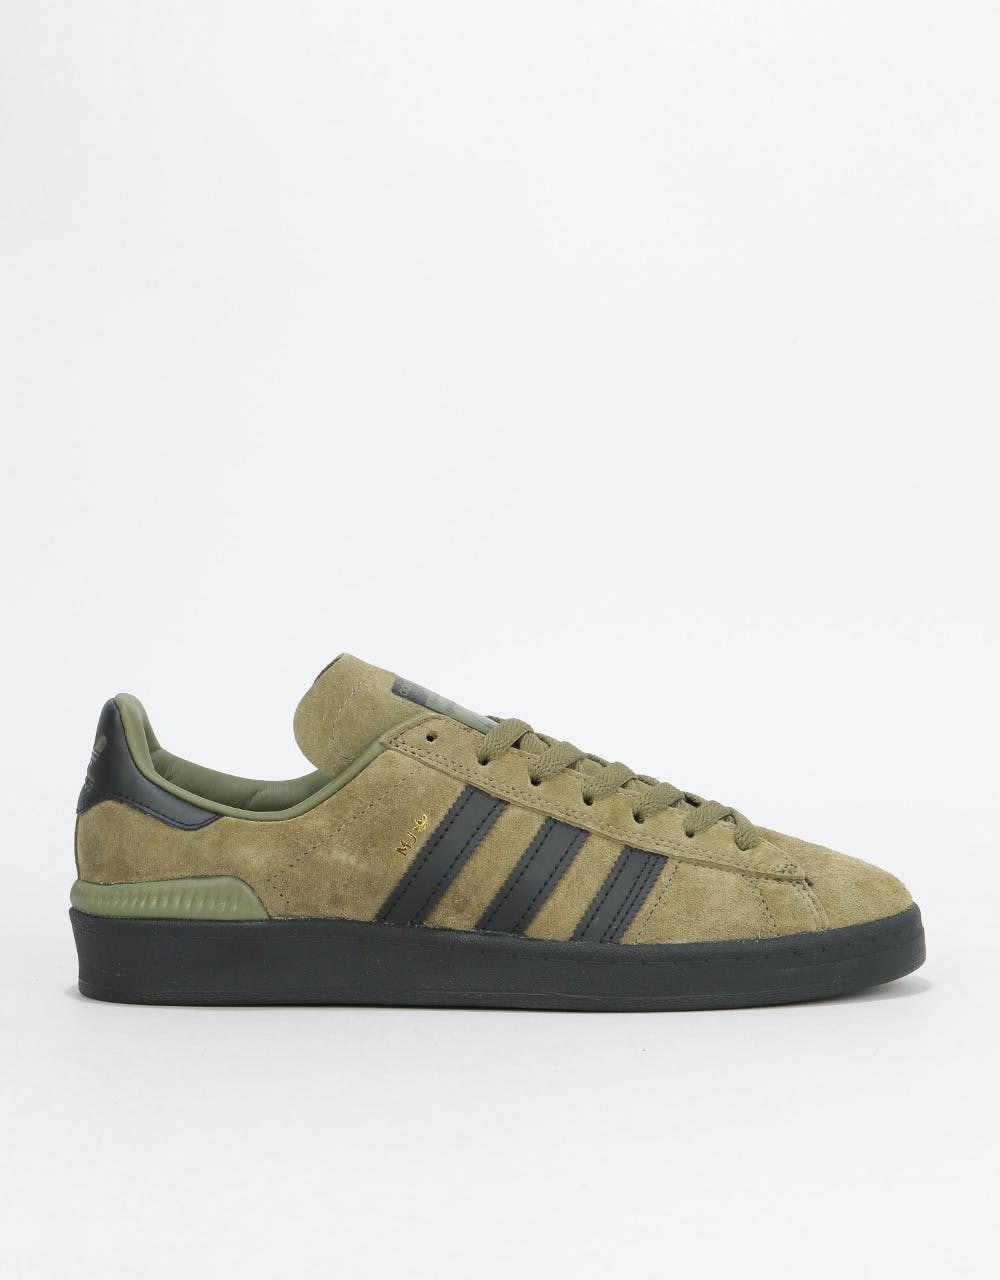 adidas MJ Campus ADV Skate Shoes - Olive Cargo/Core Black/Gold – Route One